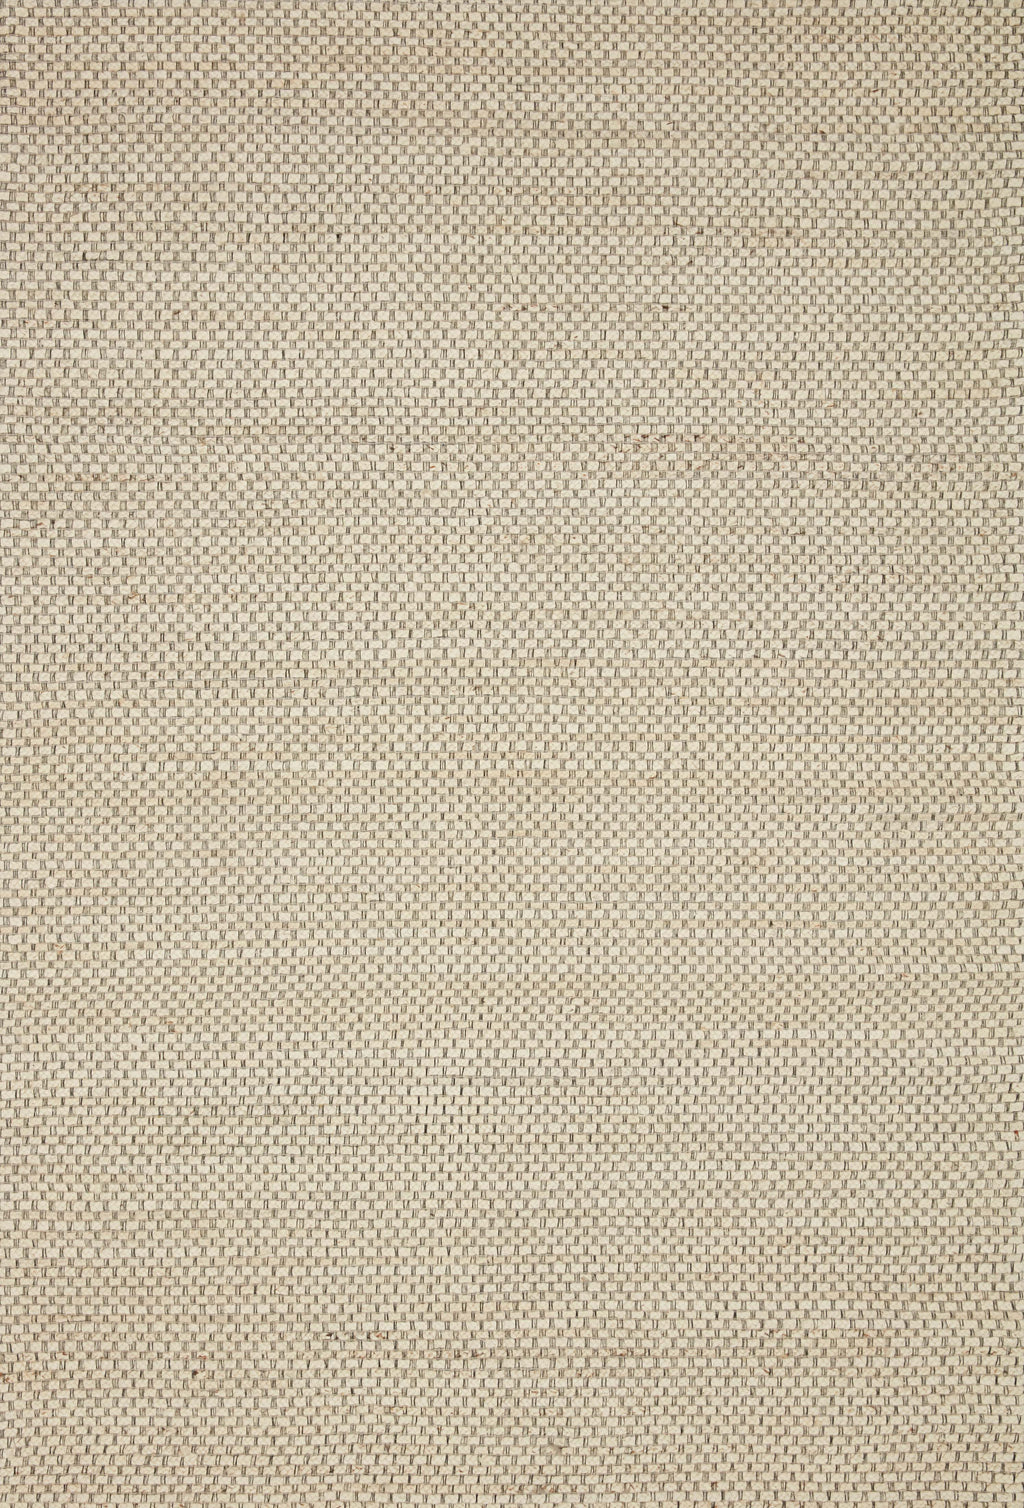 LILY Collection Rug  in  Ivory Ivory Accent Hand-Woven Viscose